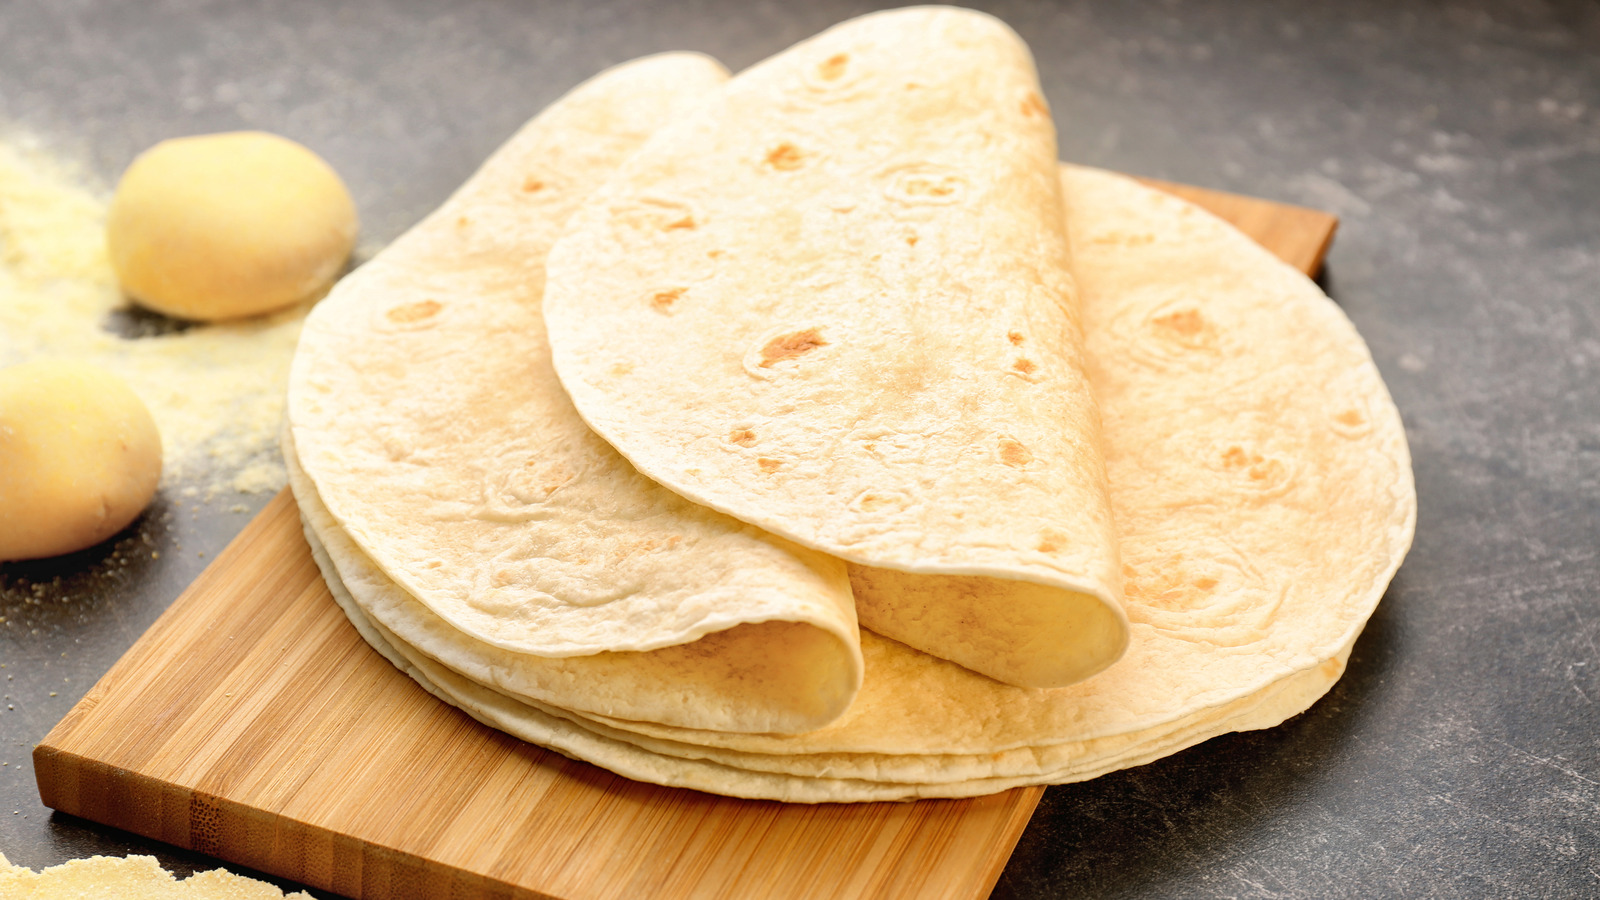 9. The Surprising Connection Between Tortillas and Blonde Hair Health - wide 6